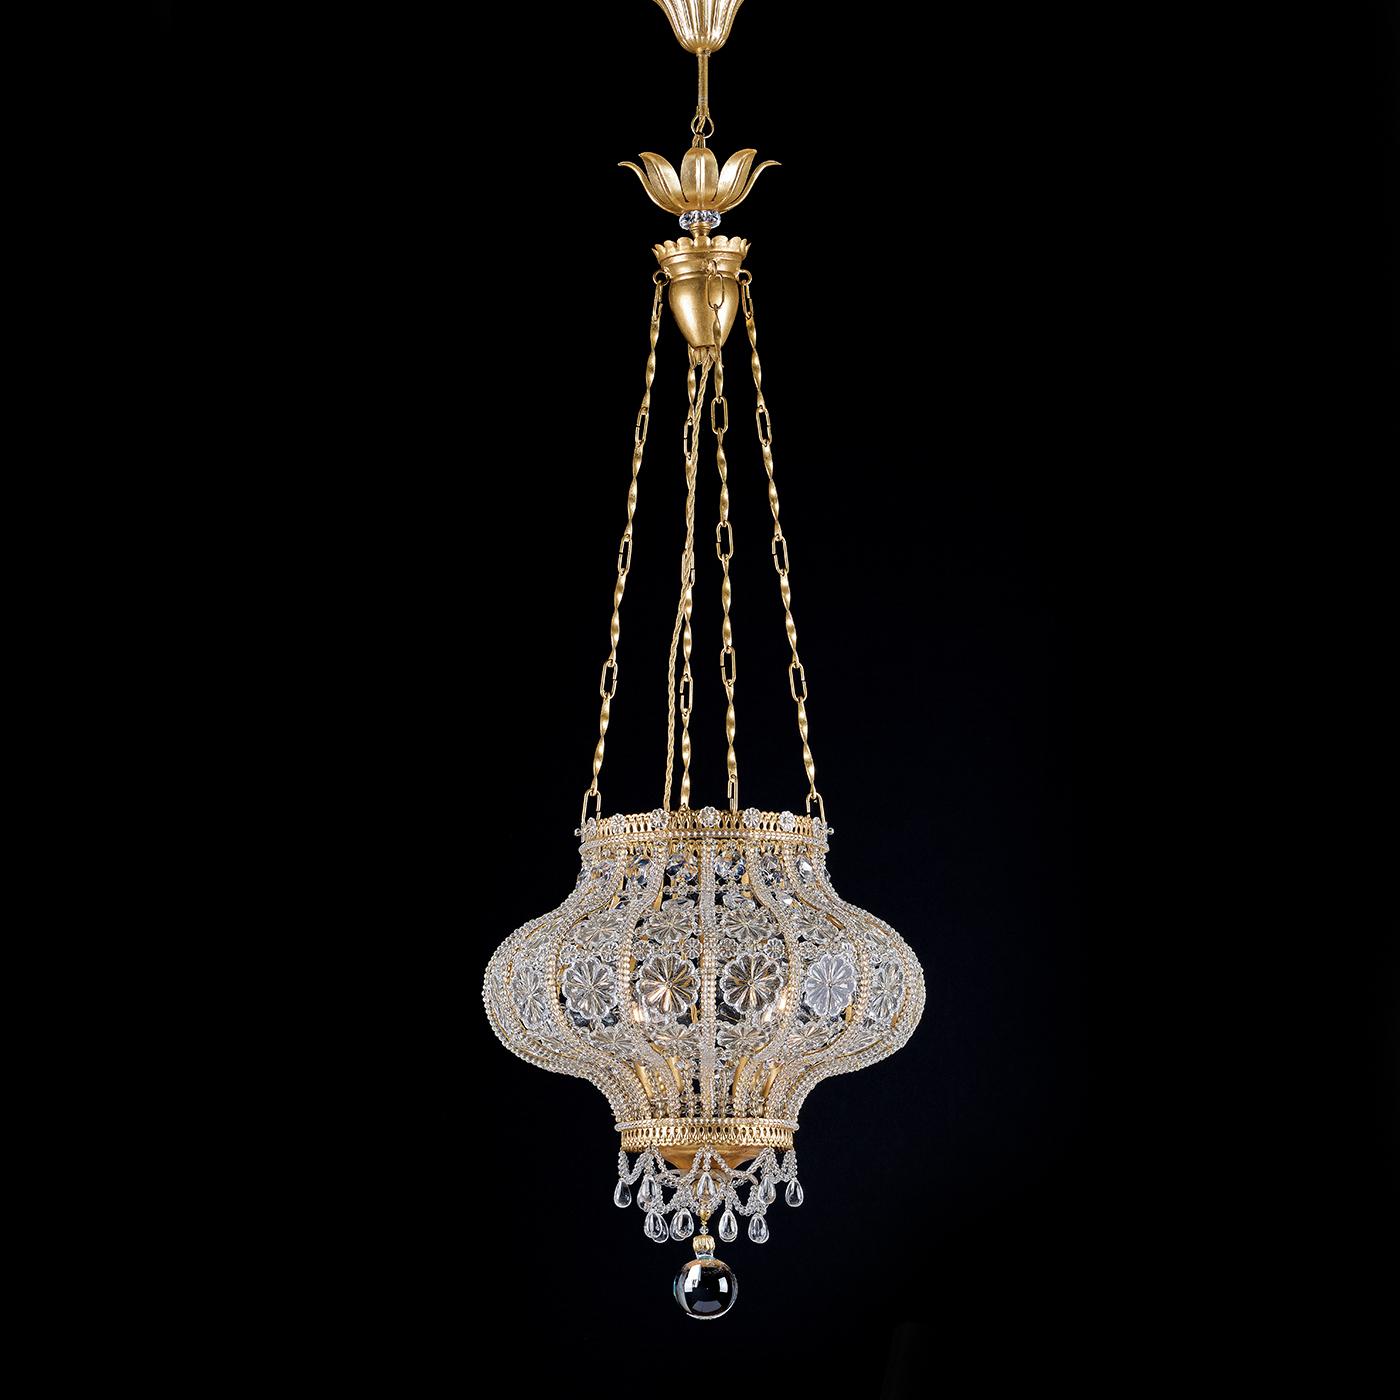 Made by hand, this pendant from Epoca Lampadari is a stunning example of Italian craftsmanship. Drawing inspiration from Middle Eastern lantern styles, the pendant features glass crystals and a gold leaf finish, for a charming addition to a